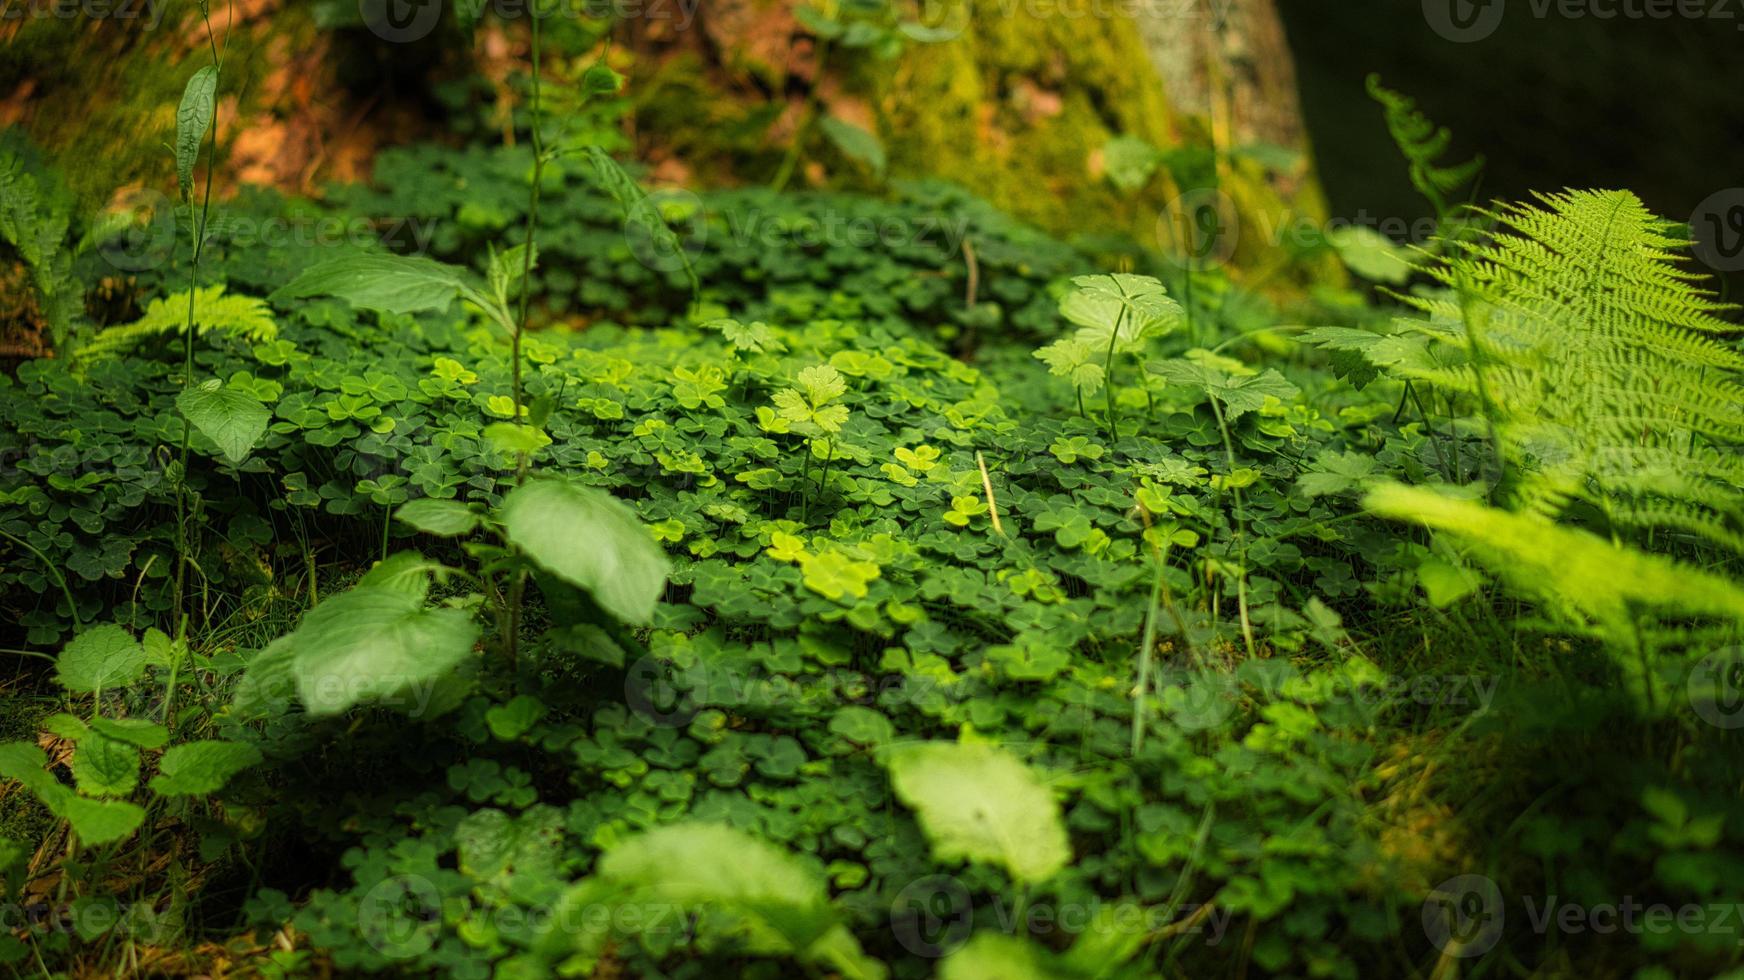 Clover field in the forest on a tree. Clover is the lucky charm photo